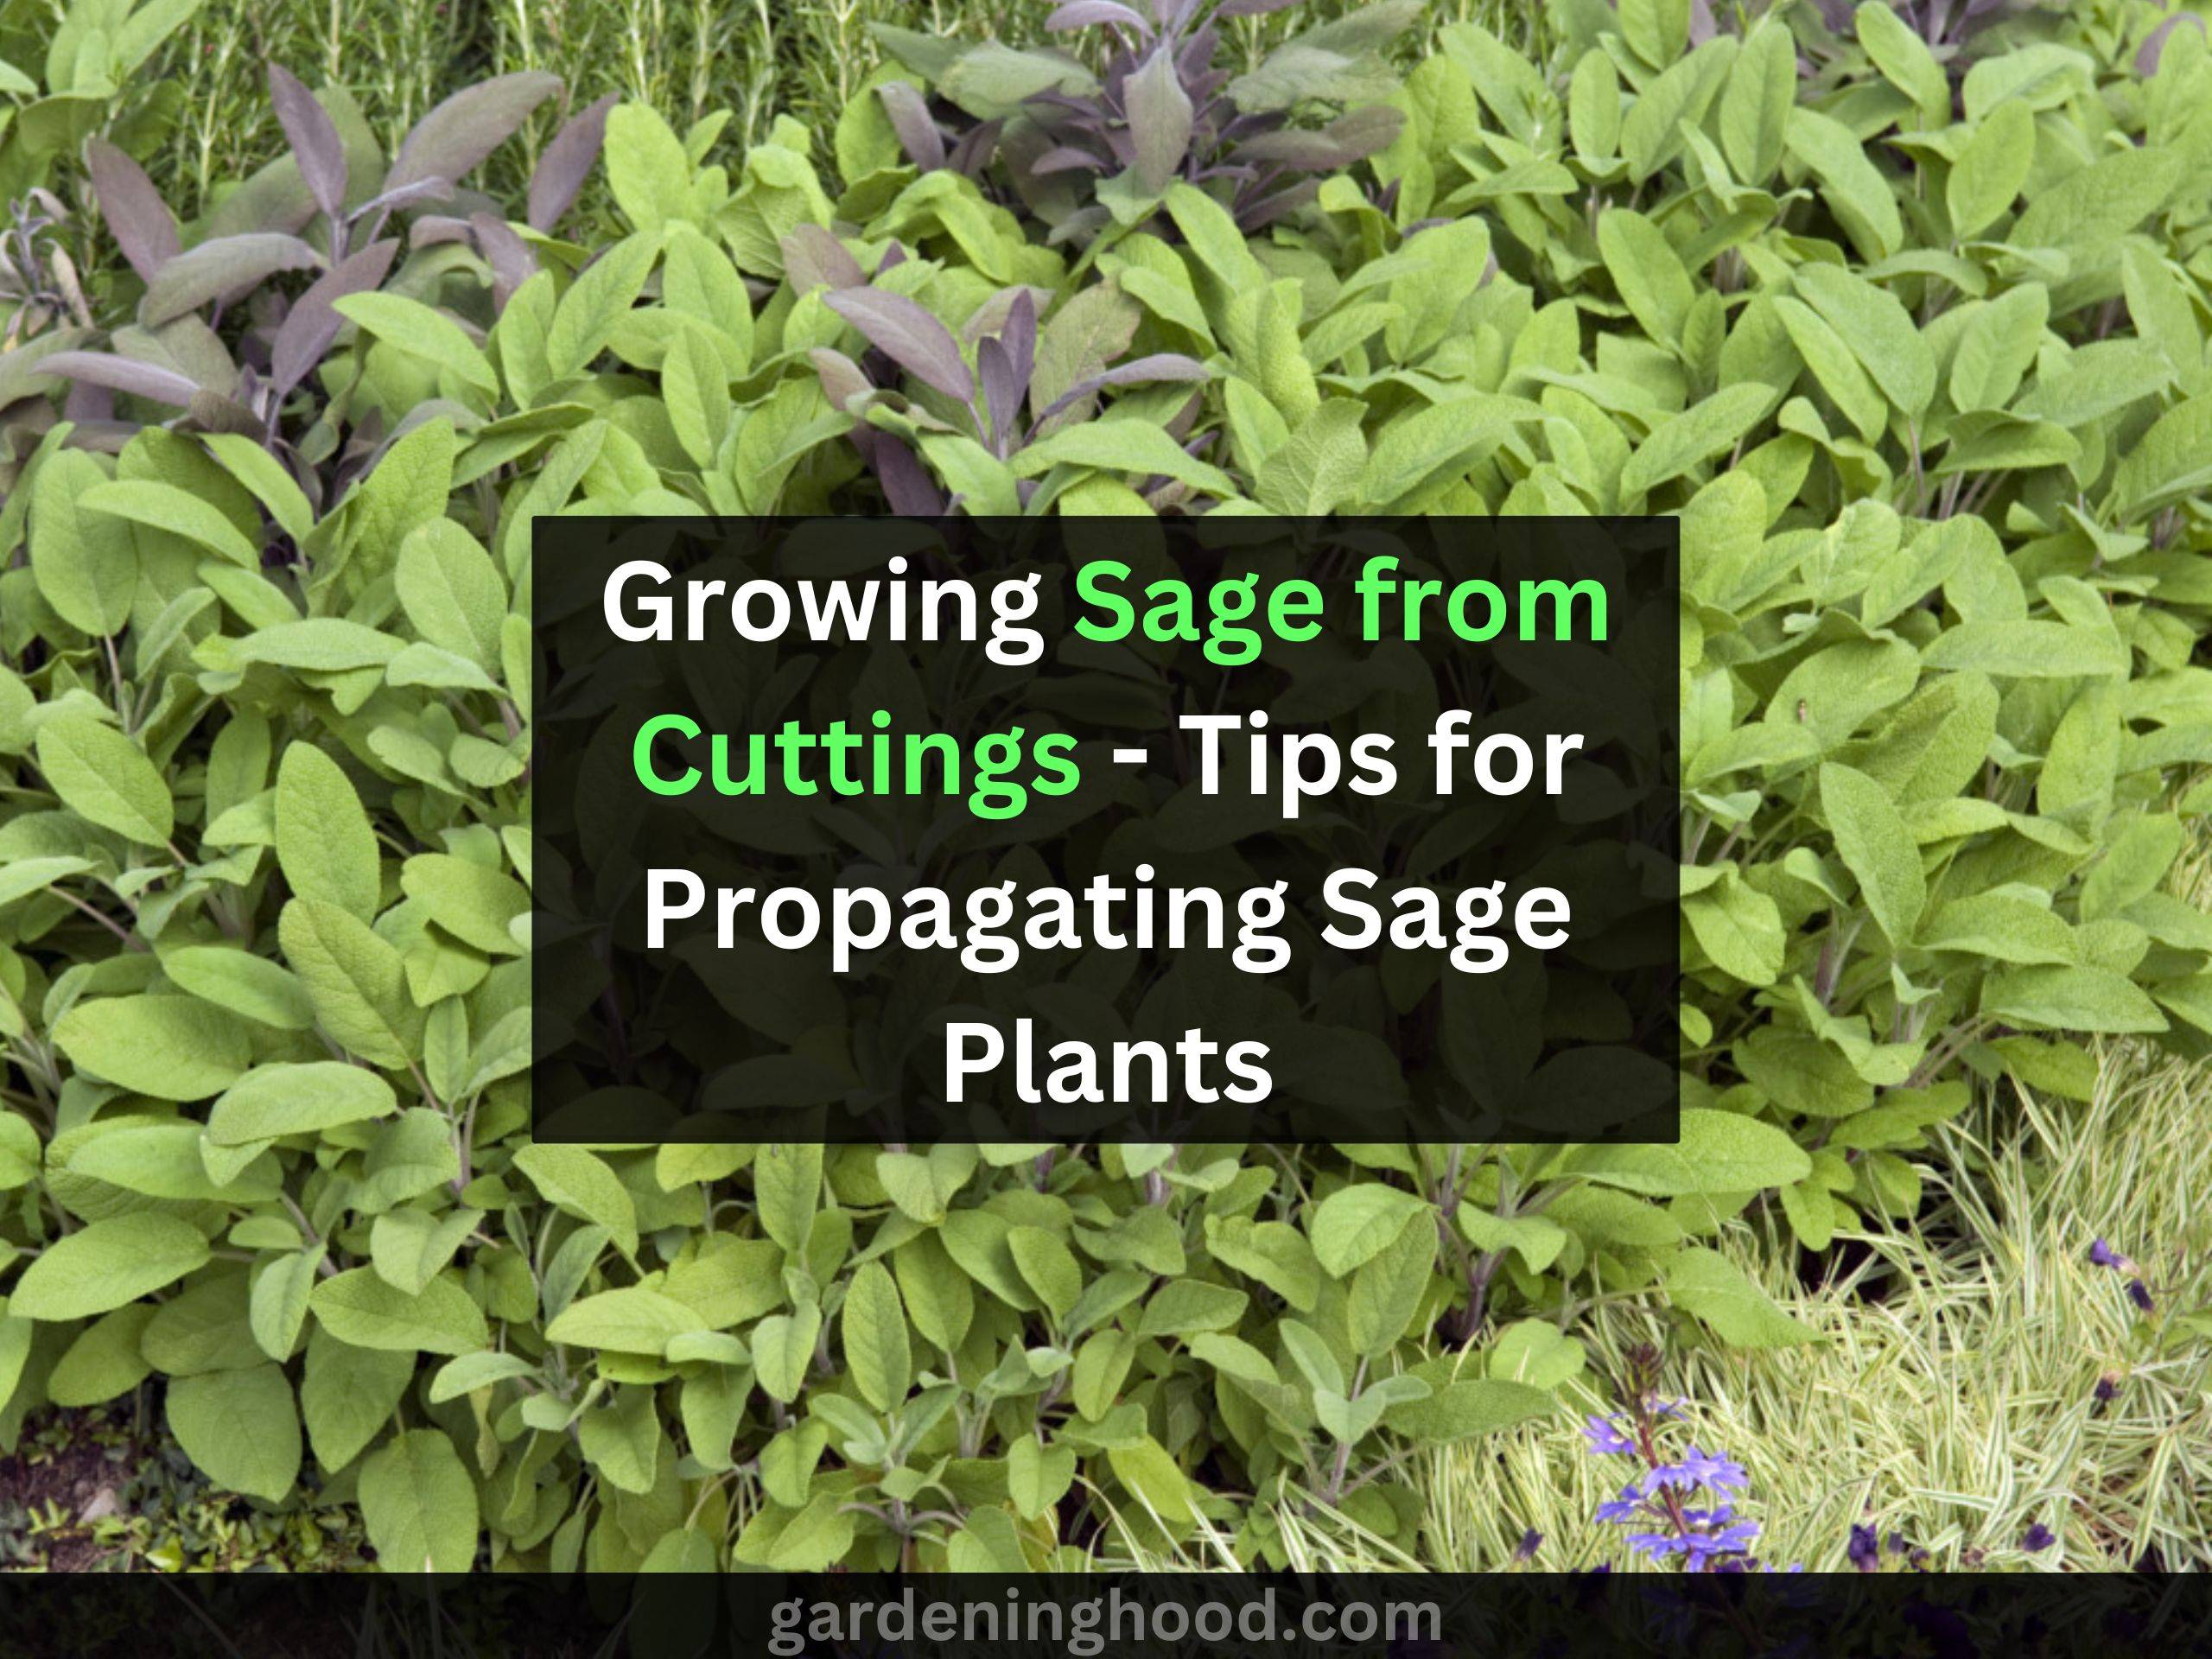 Growing Sage from Cuttings - Tips for Propagating Sage Plants